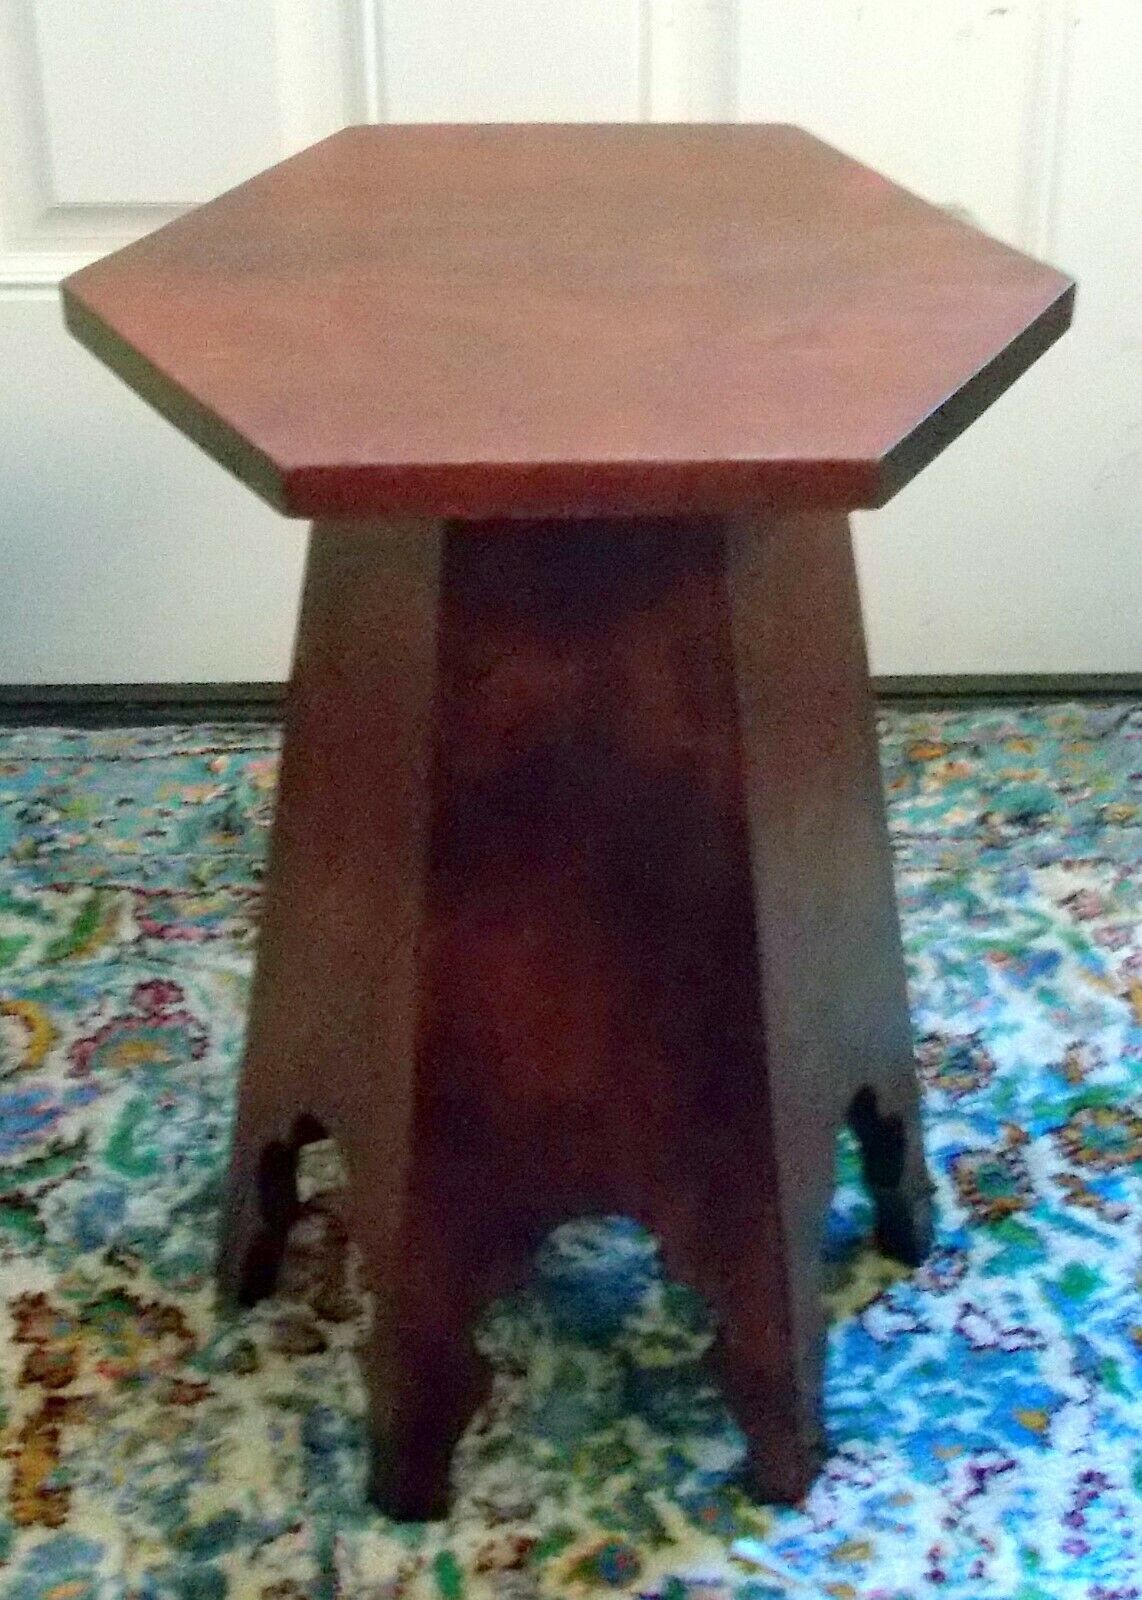 Antique Arts & Crafts TABOURET TABLE Bench Moroccan Gothic